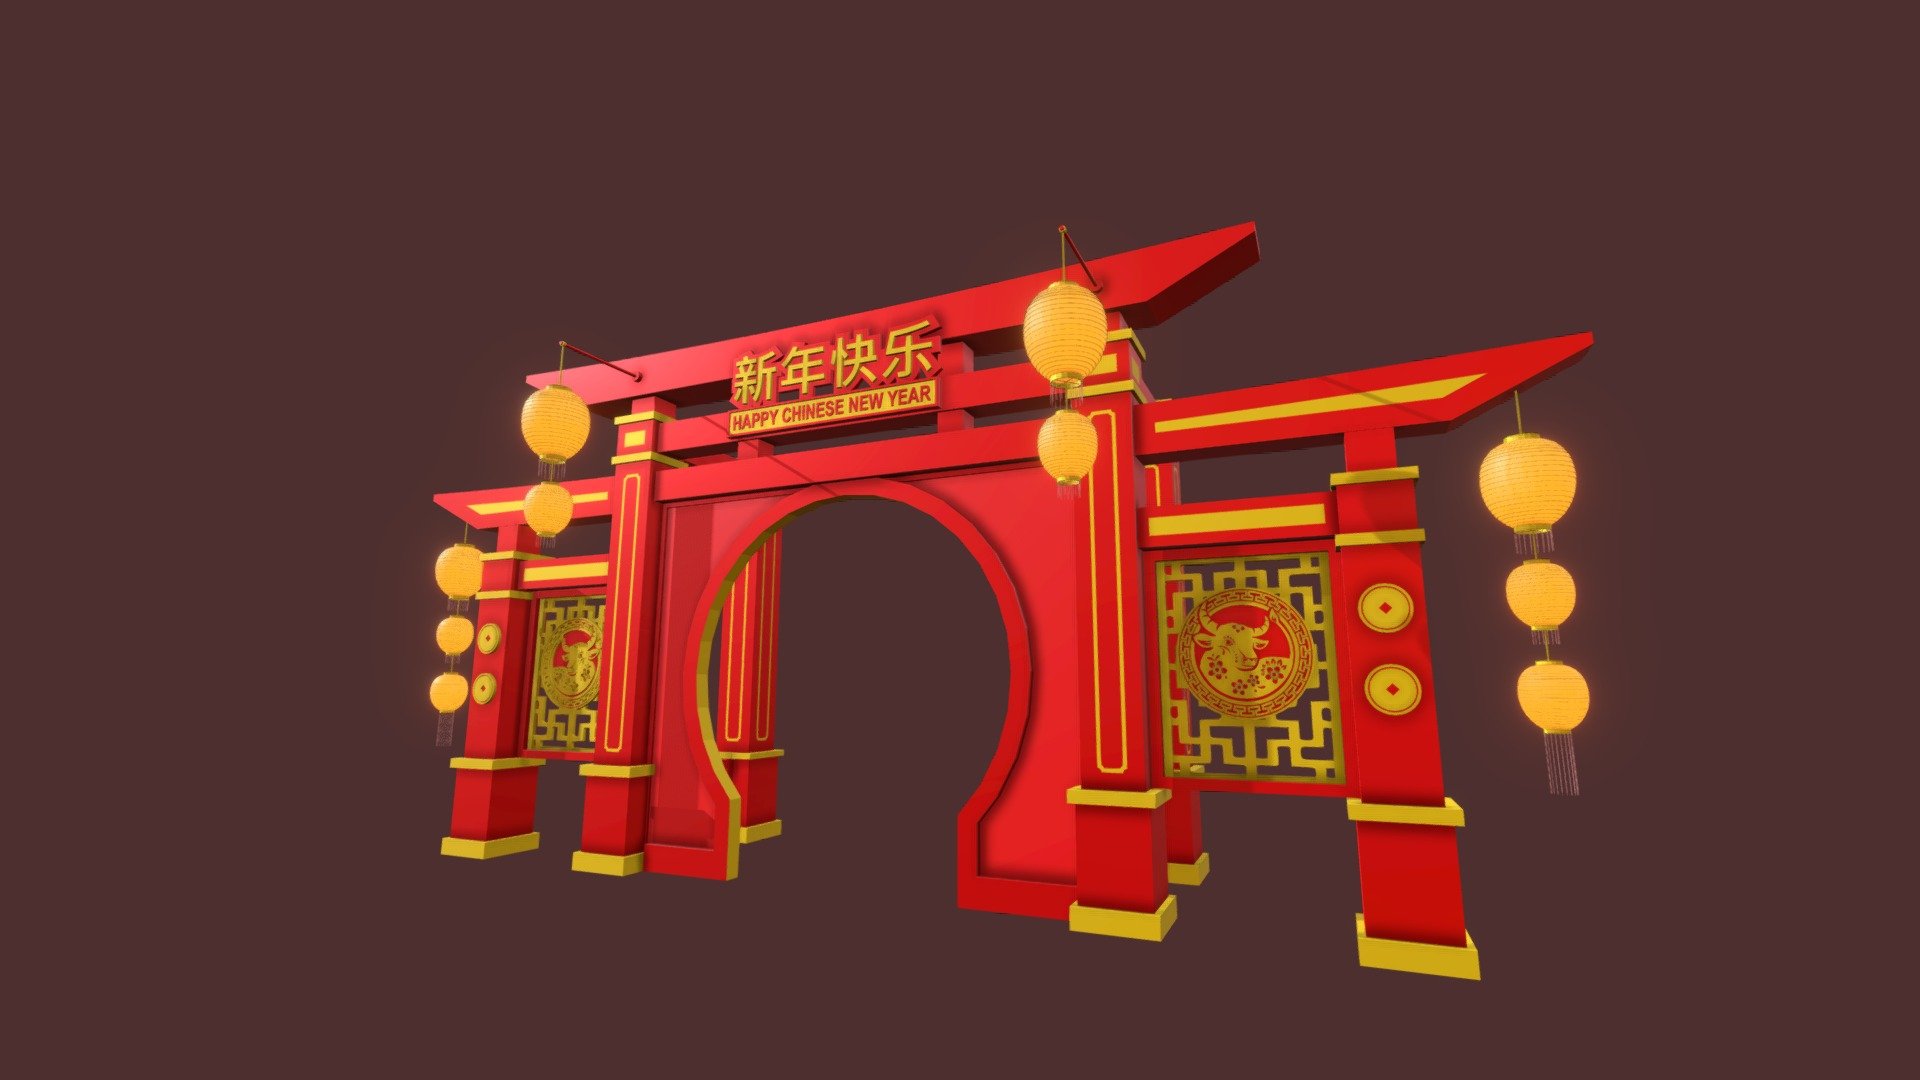 Chinese traditional door gate is typically made of wood and has a distinct shape with a curved roof and decorative ornaments that depict good fortune and symbolism in Chinese culture. This door gate is usually an important symbol in traditional Chinese architecture, especially in historical buildings such as temples and palaces 3d model